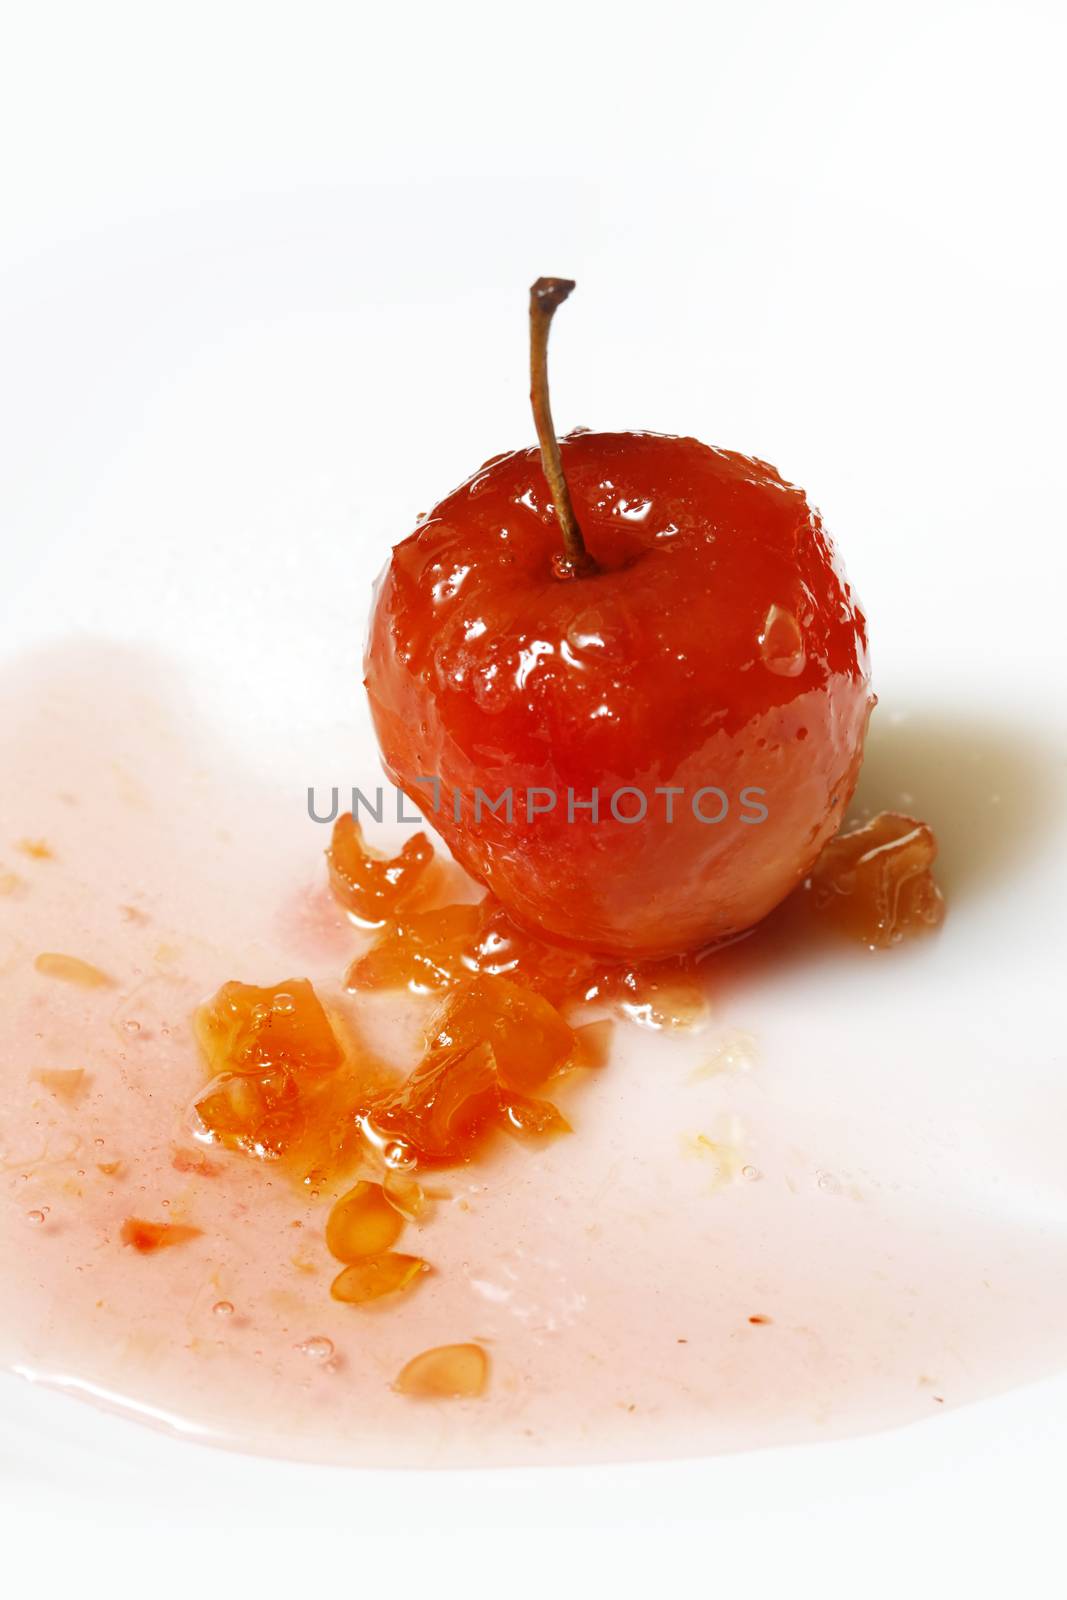 Red apple in rose syrup with small pieces of zucchini over isolated white background